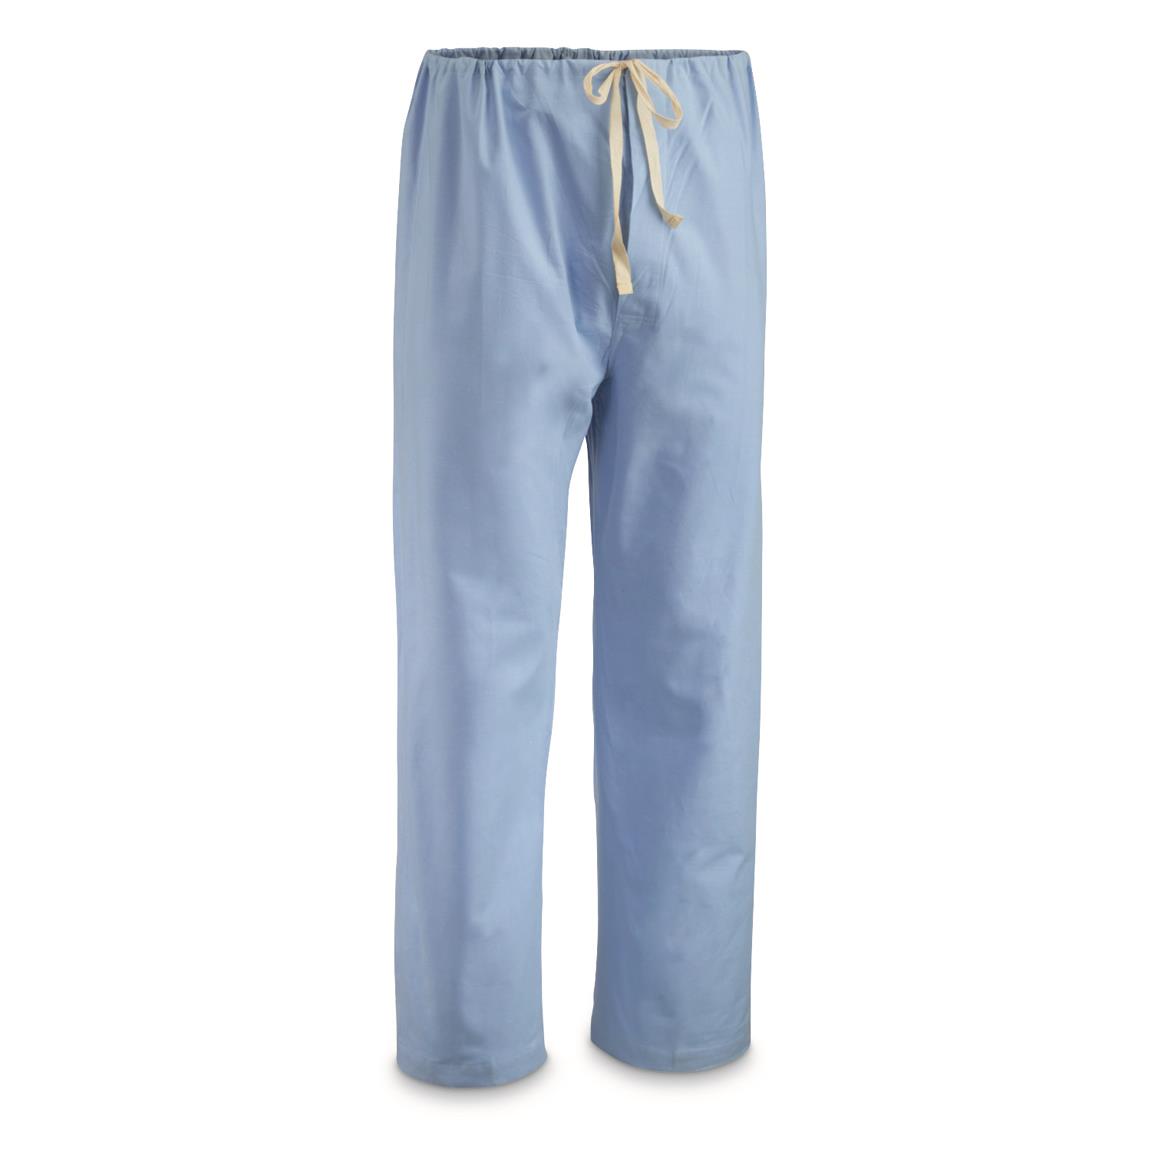 French Military Surplus Pajama Pants, 3 Pack, New, Blue